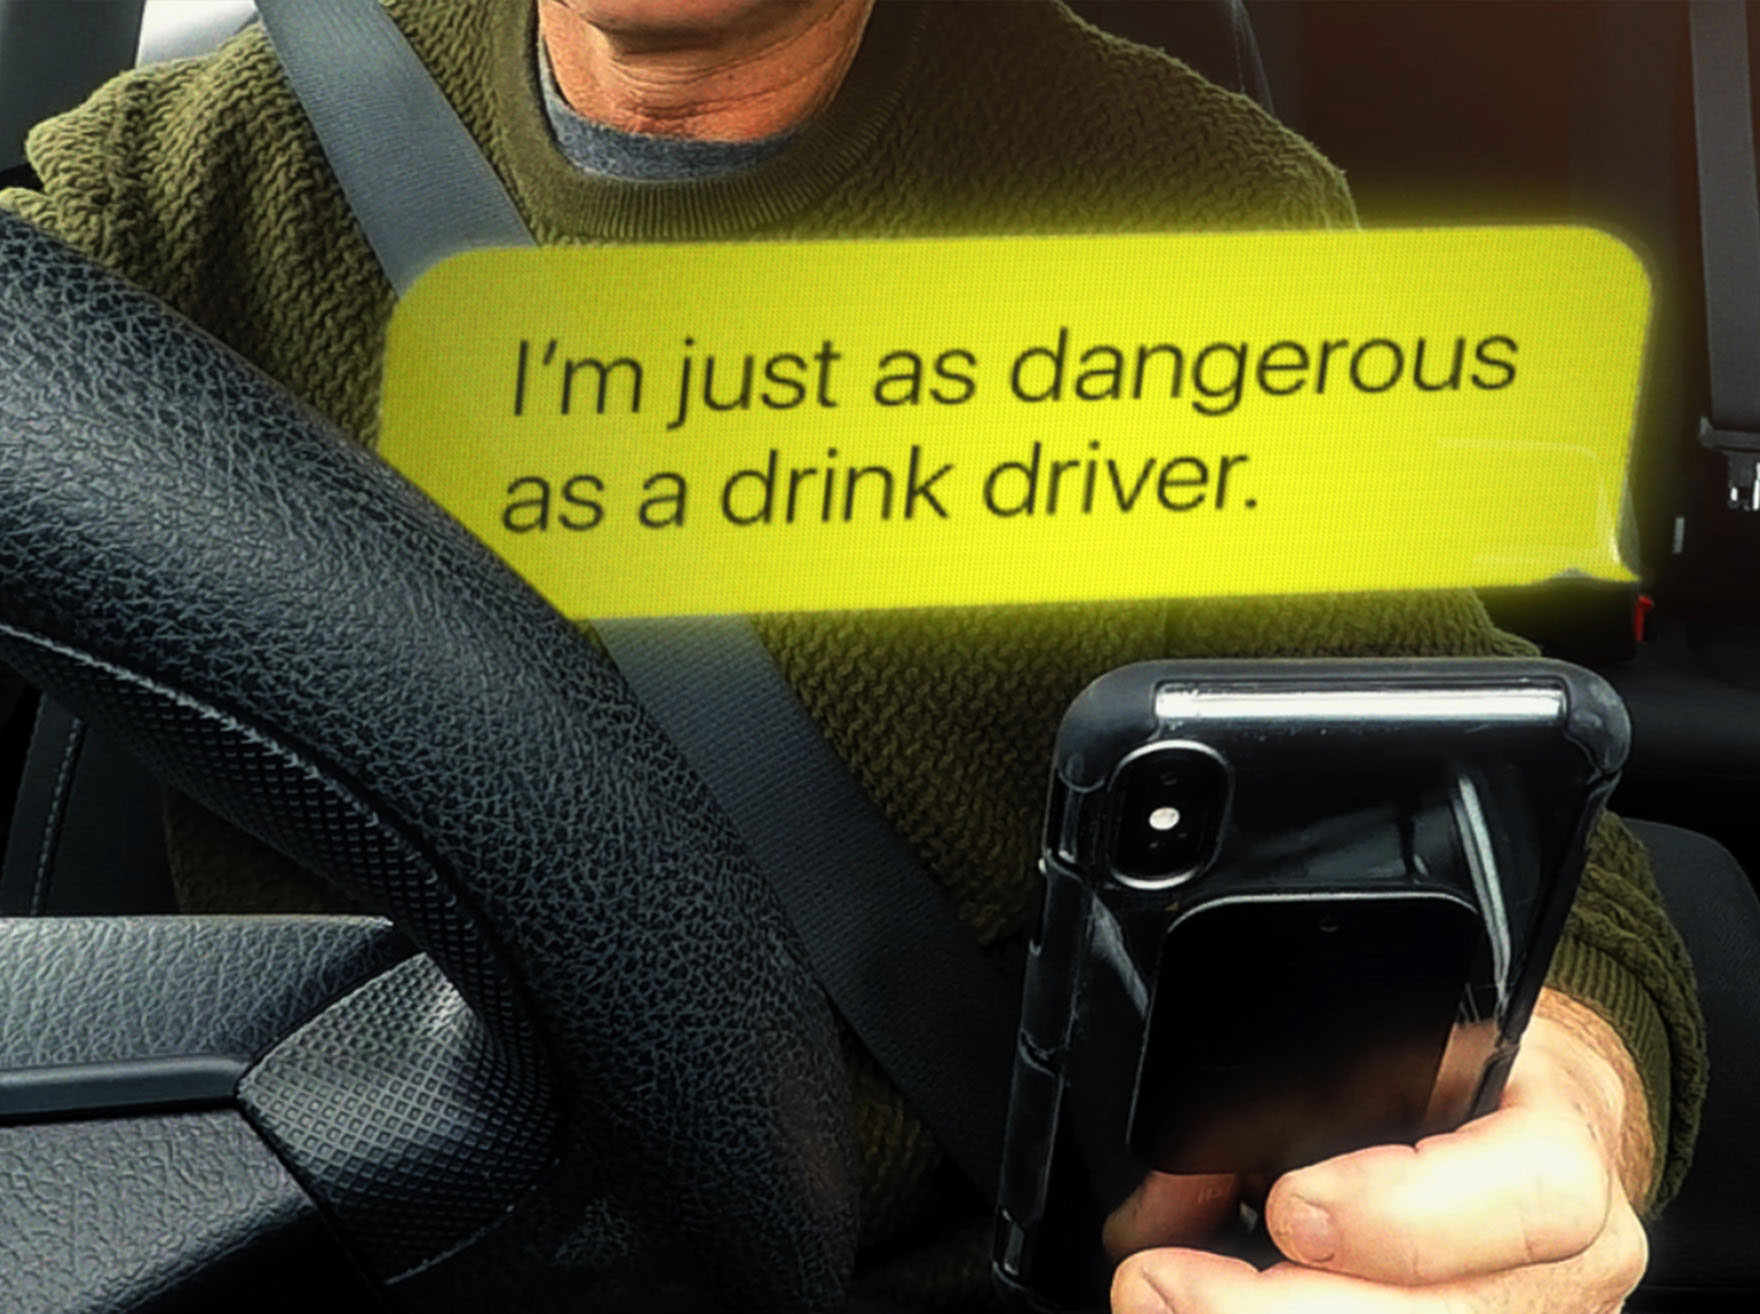 Man texts while driving with the message 'I'm just as dangerous as a drink driver'